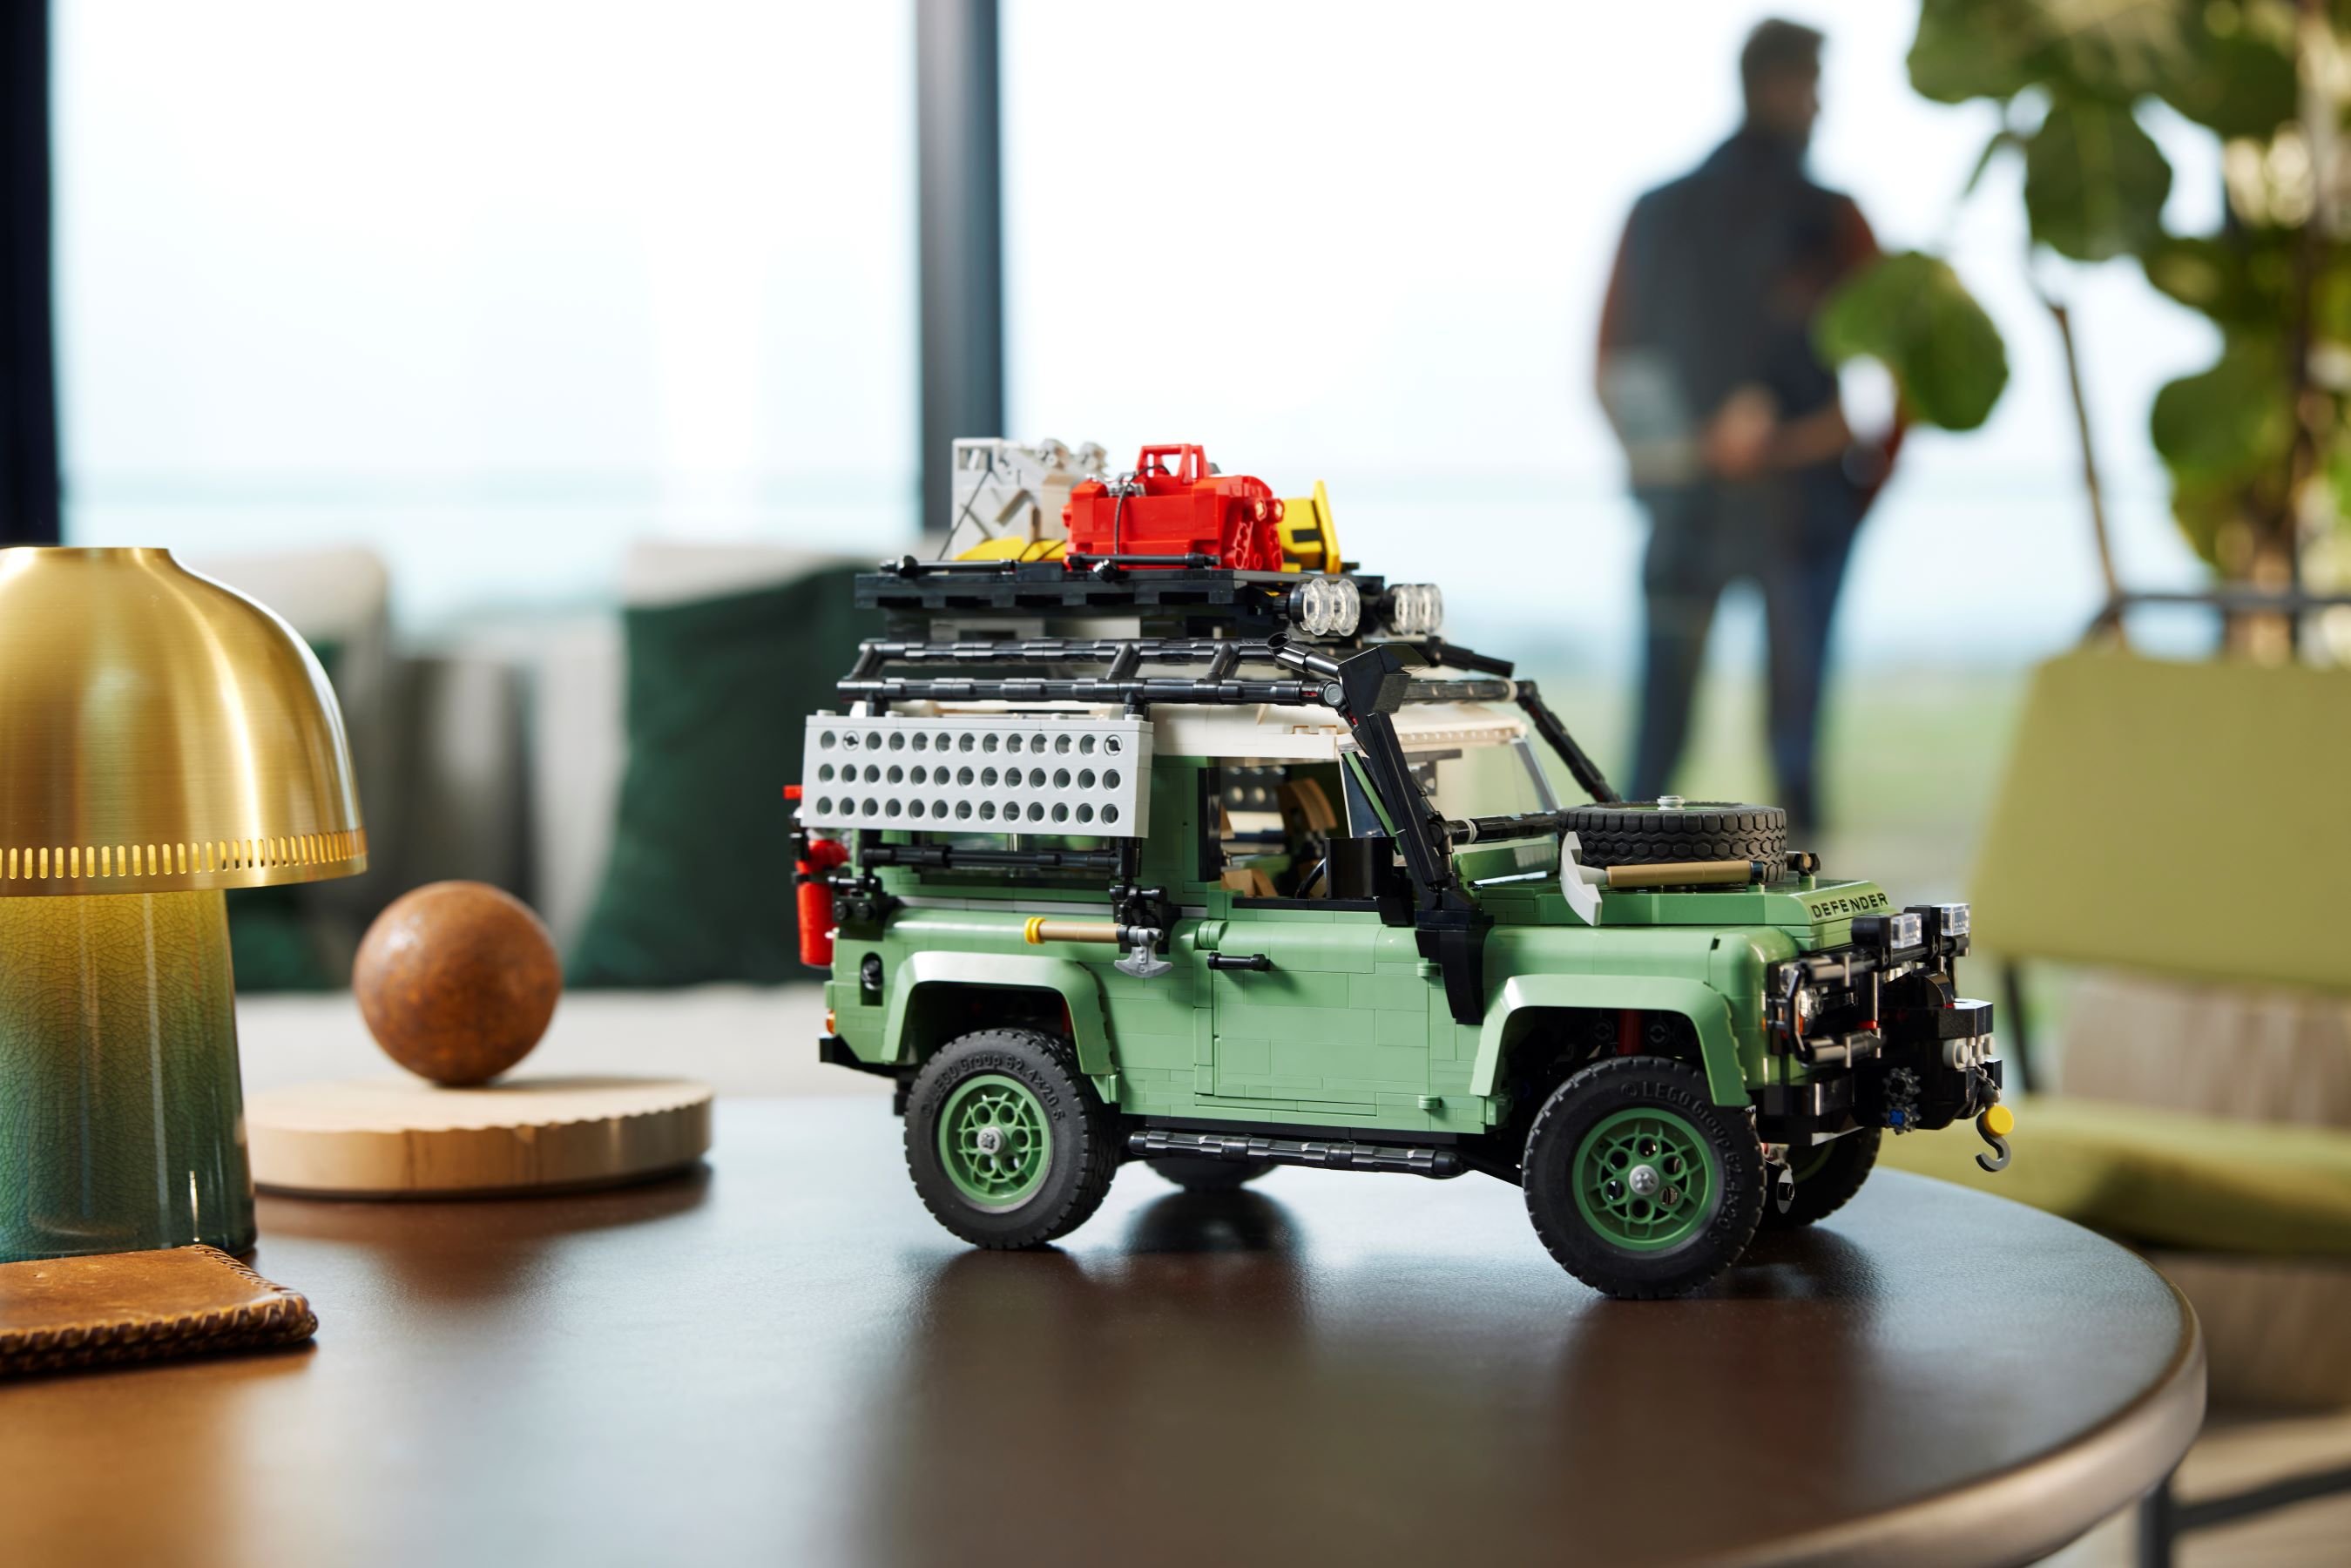 Land Rover Classic 90 10317 | LEGO® Icons | Buy online at the Official LEGO® Shop US